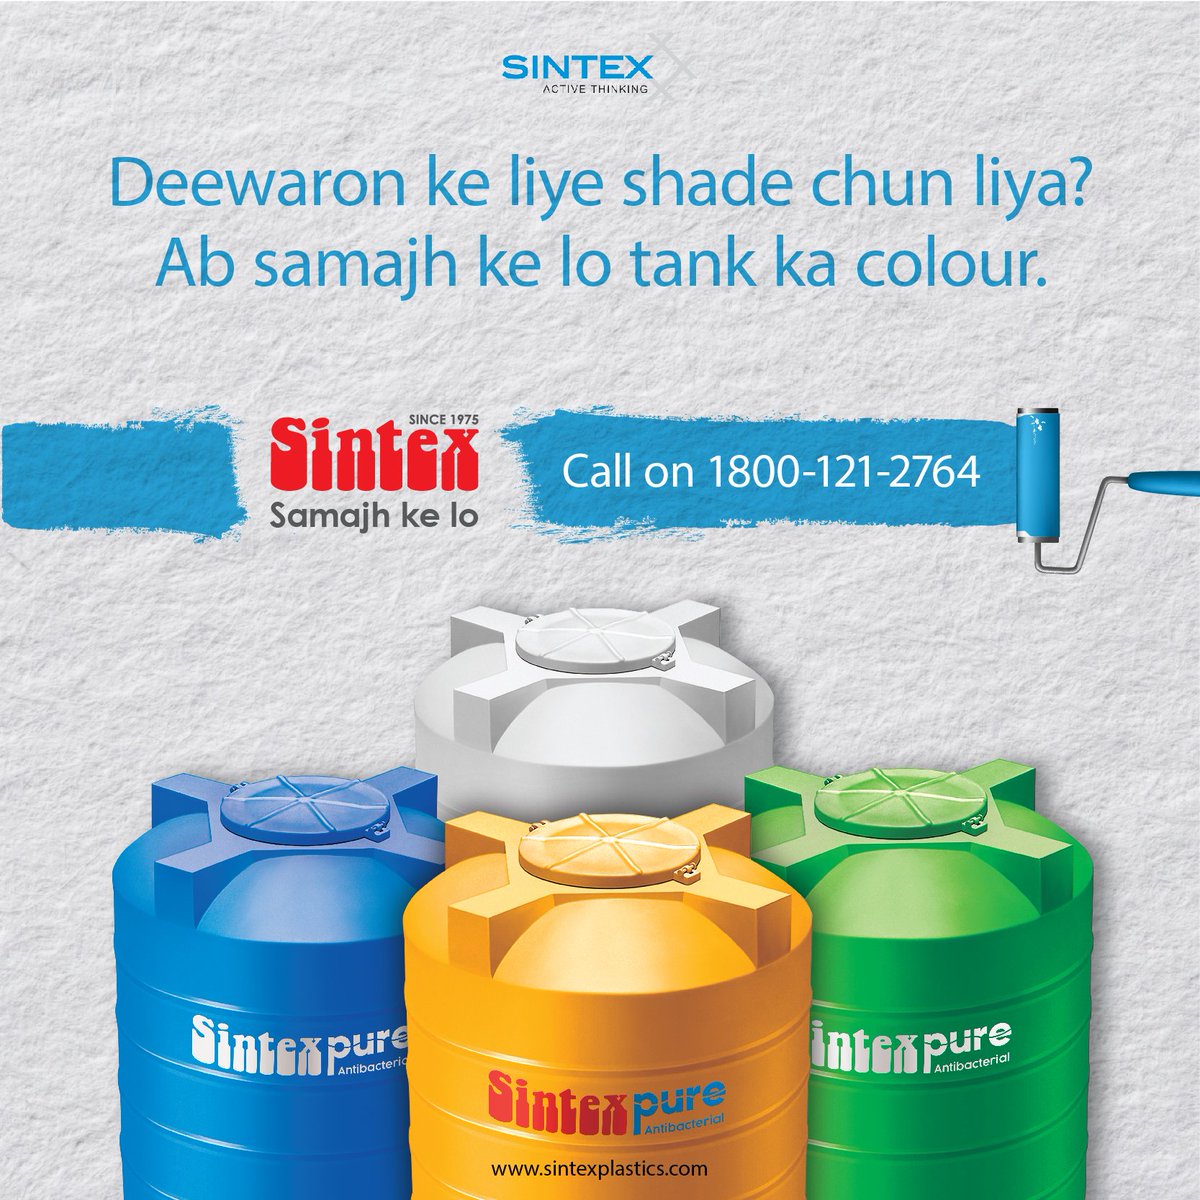 Made with best-in-class technology & available in a range of attractive colours, #SintexPureAntibacterialWaterTanks is best gift for your family this Diwali. #SintexTitus #NewRange #HappyDiwali #SamajhKeLo